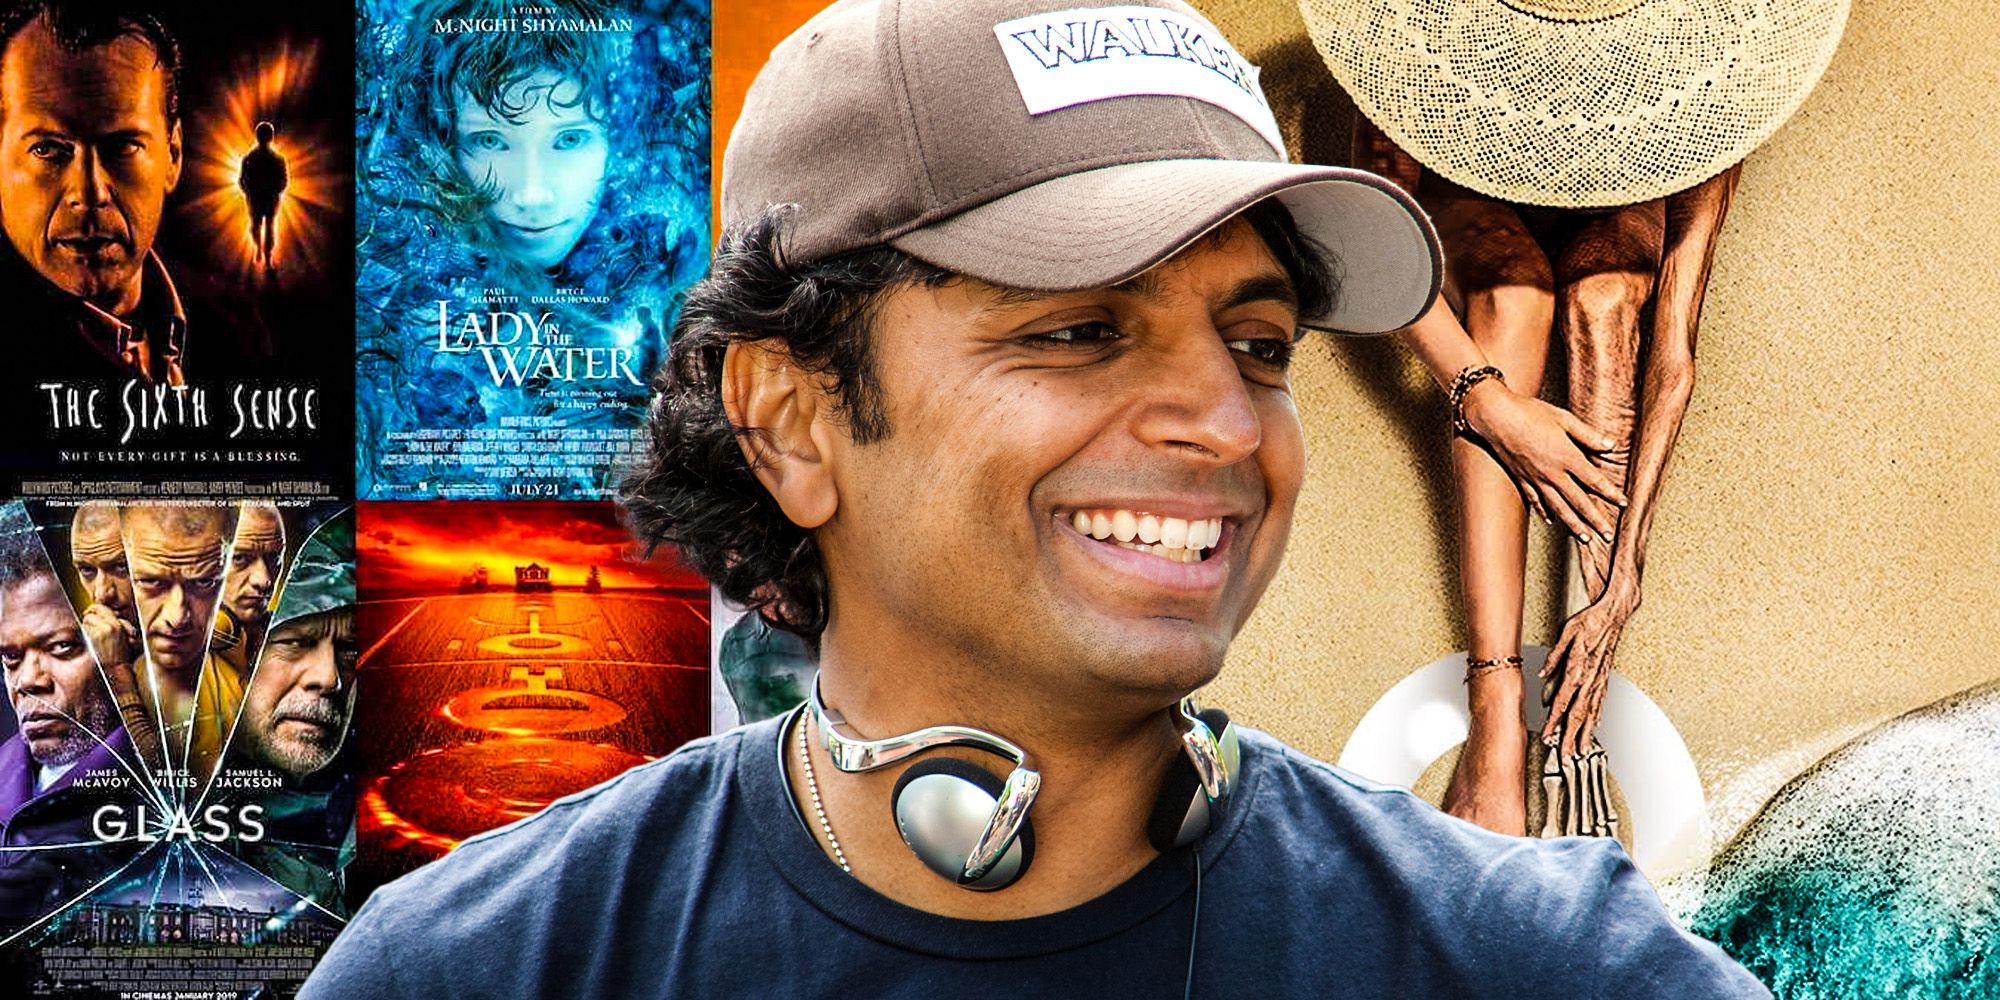 Where To Watch Every M. Night Shyamalan Movie (Including Old)